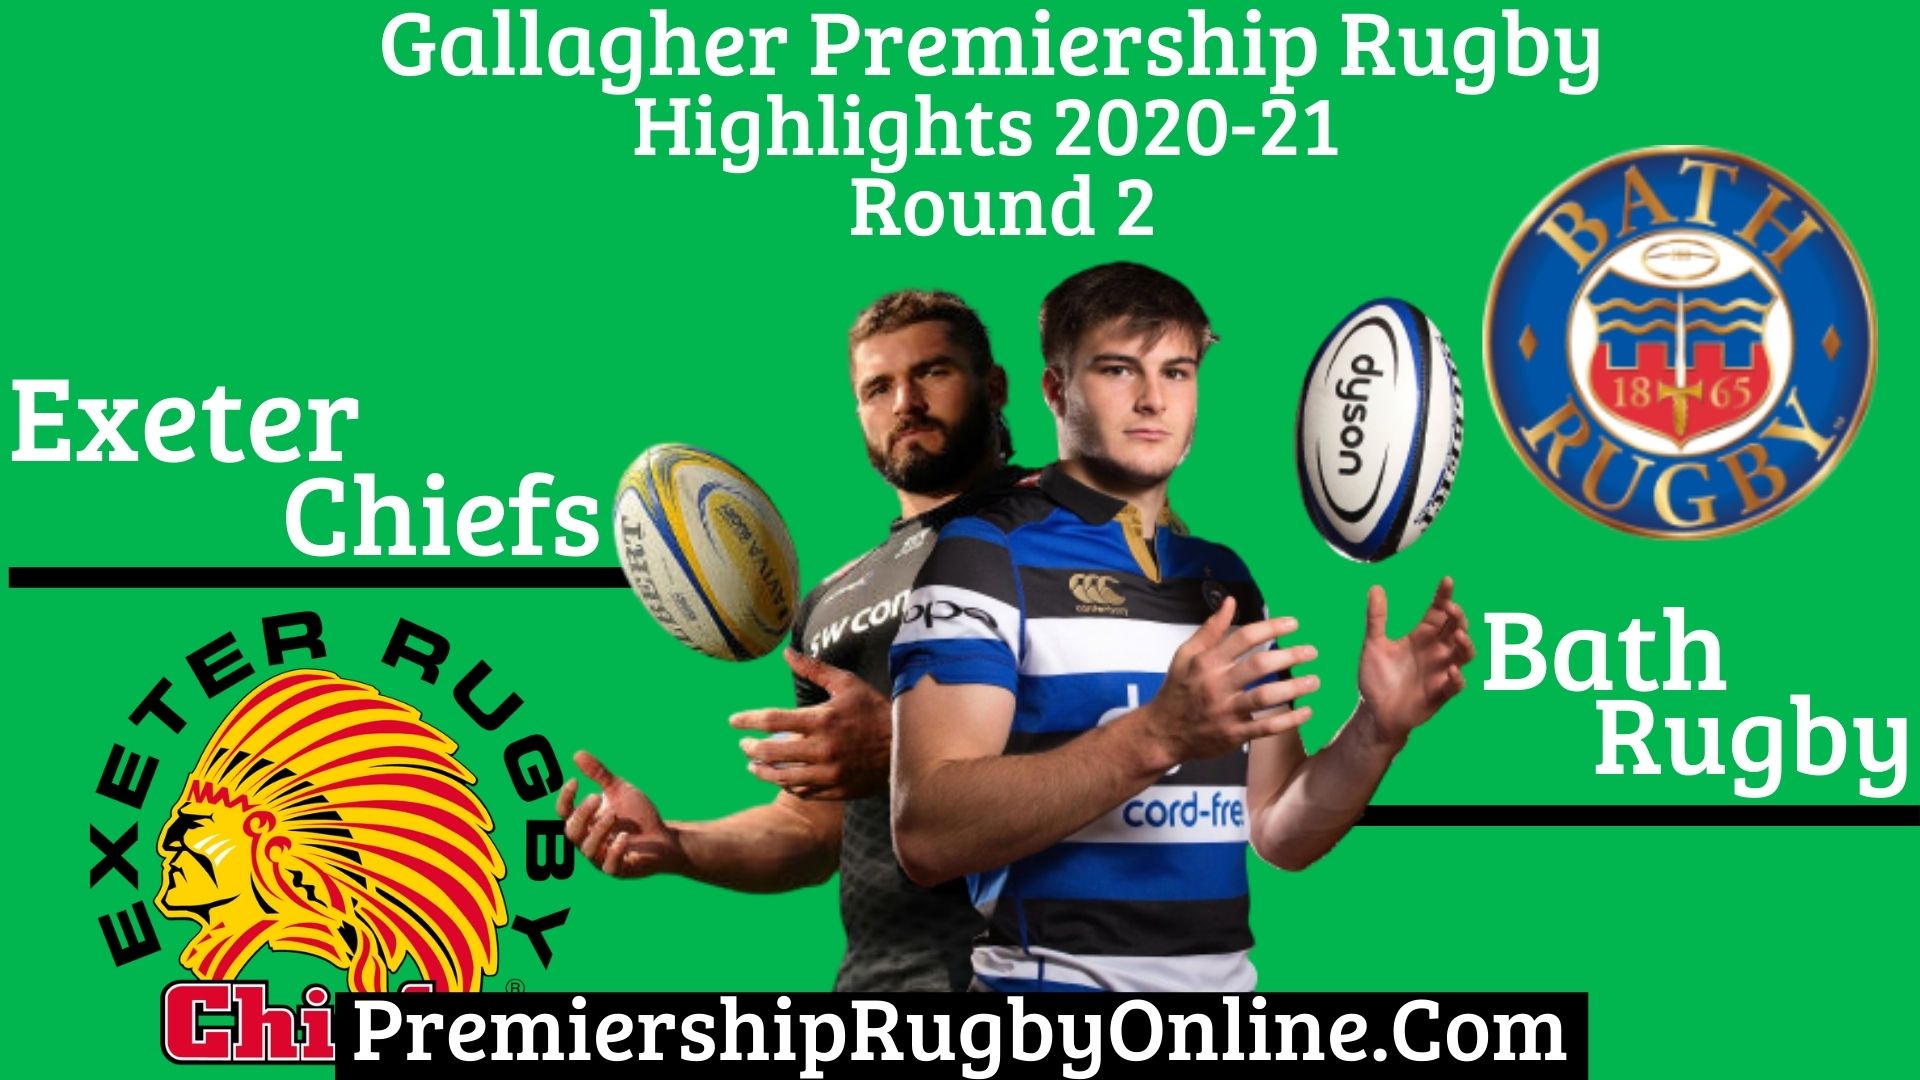 Exeter Chiefs Vs Bath Rugby Highlights 2020 RD 2